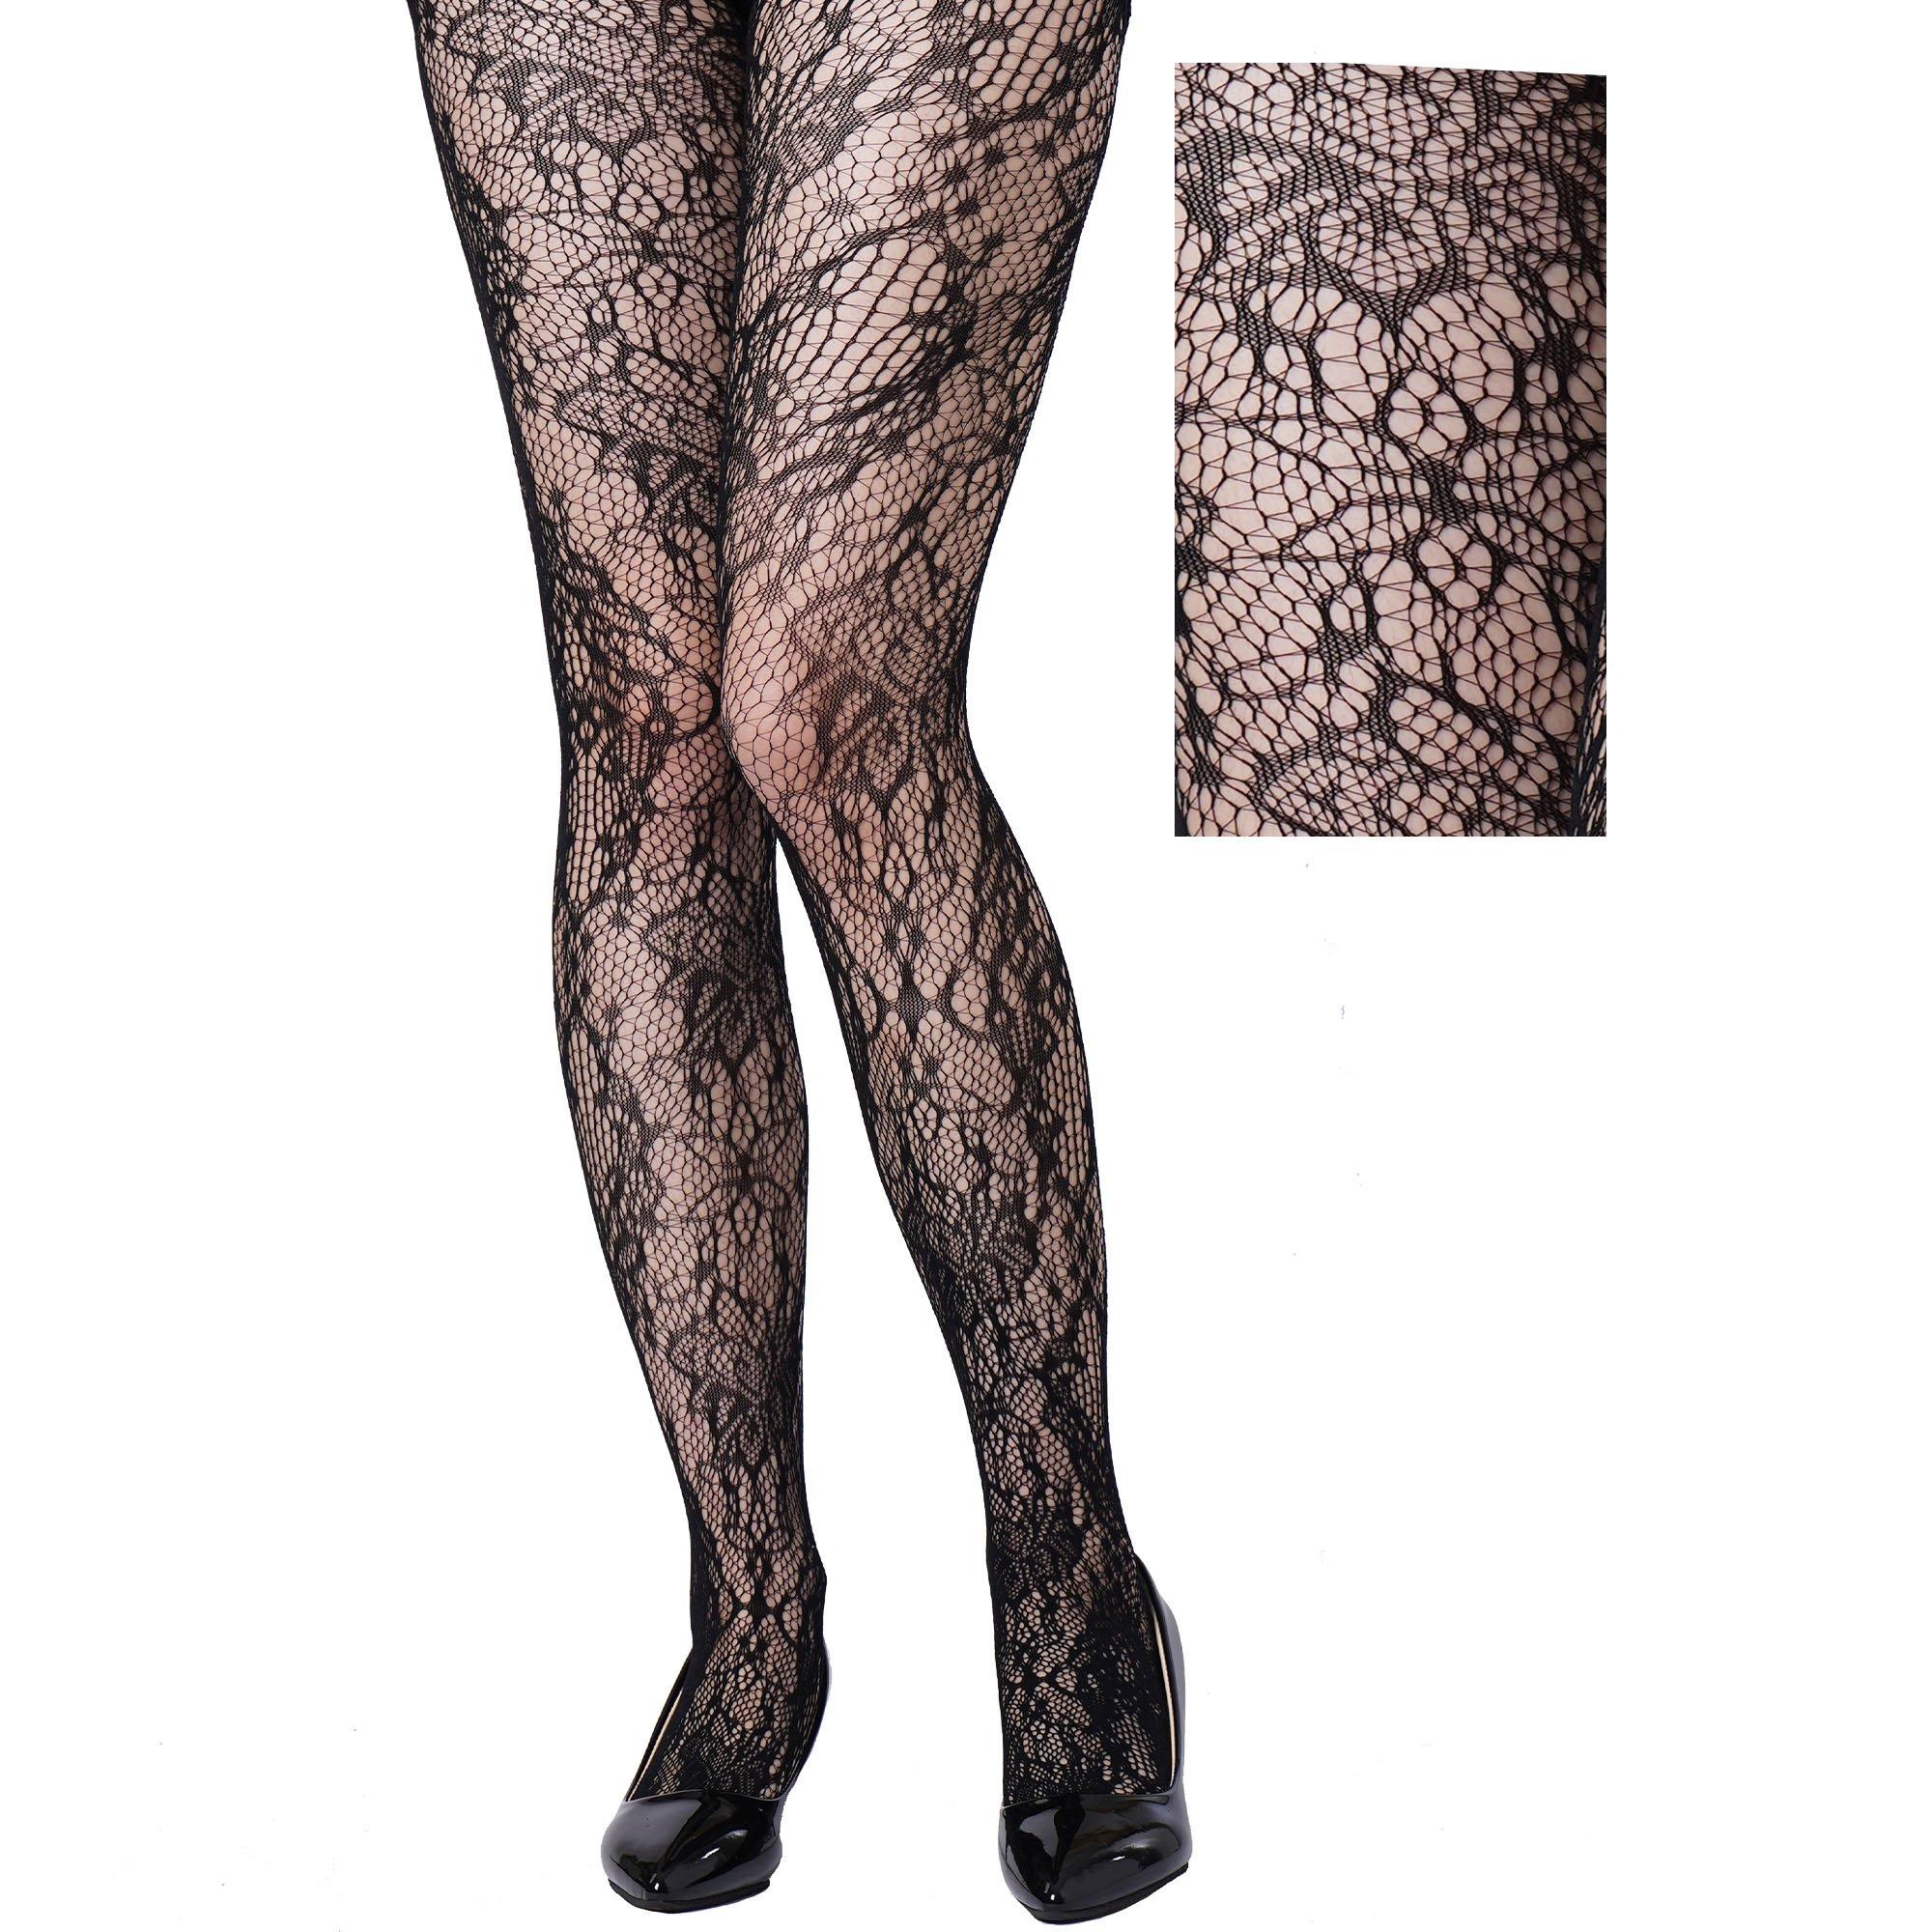 Plus Size Diamond Net Fishnet Thigh High Stockings, Black with Back Seam  and Vinyl Bow